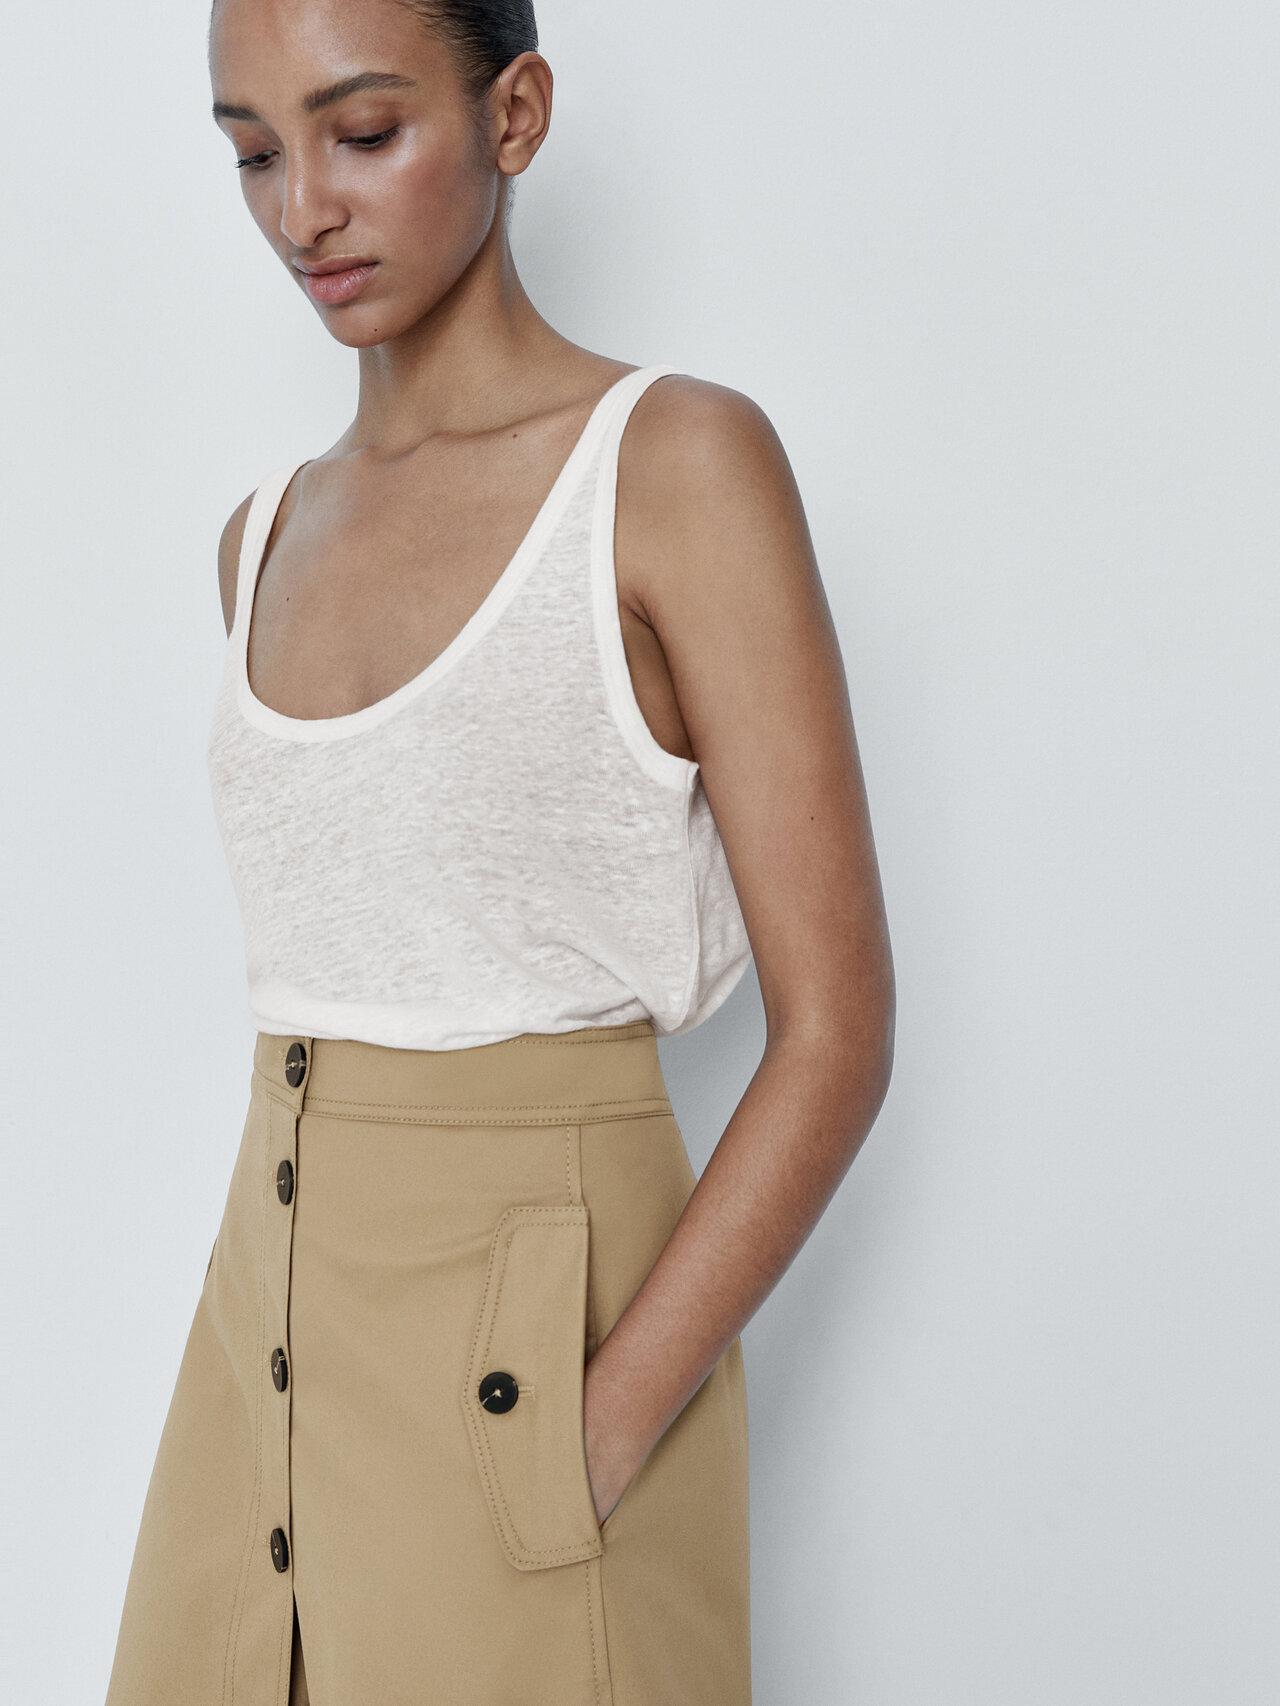 MASSIMO DUTTI Midi Skirt With Contrast Buttons in Natural | Lyst